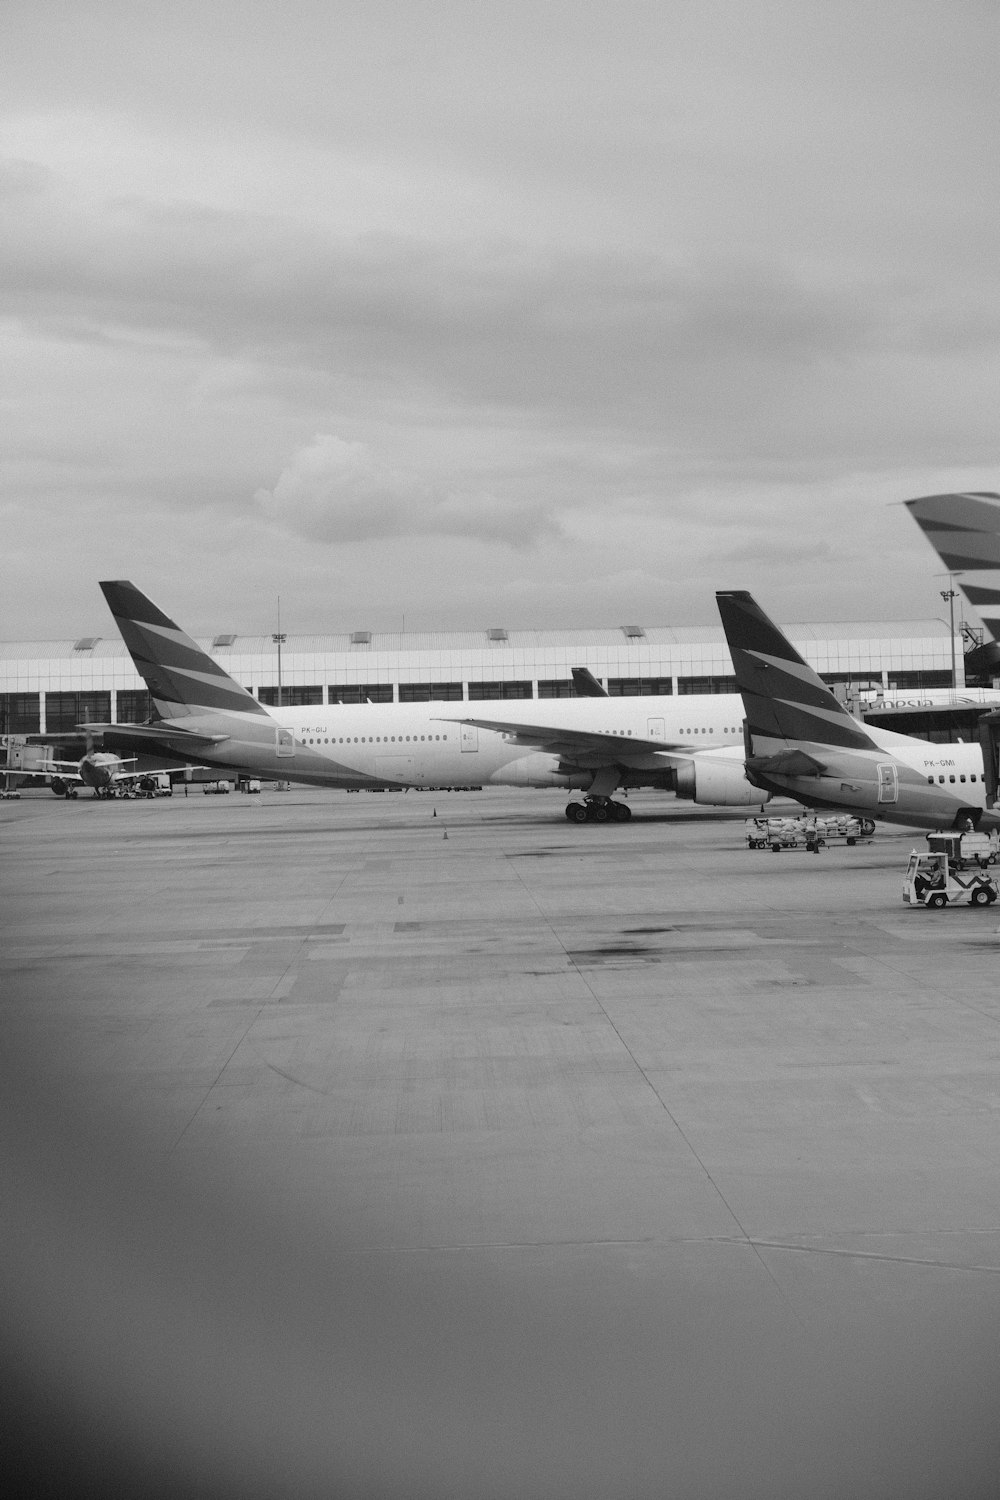 a black and white photo of two airplanes on the tarmac